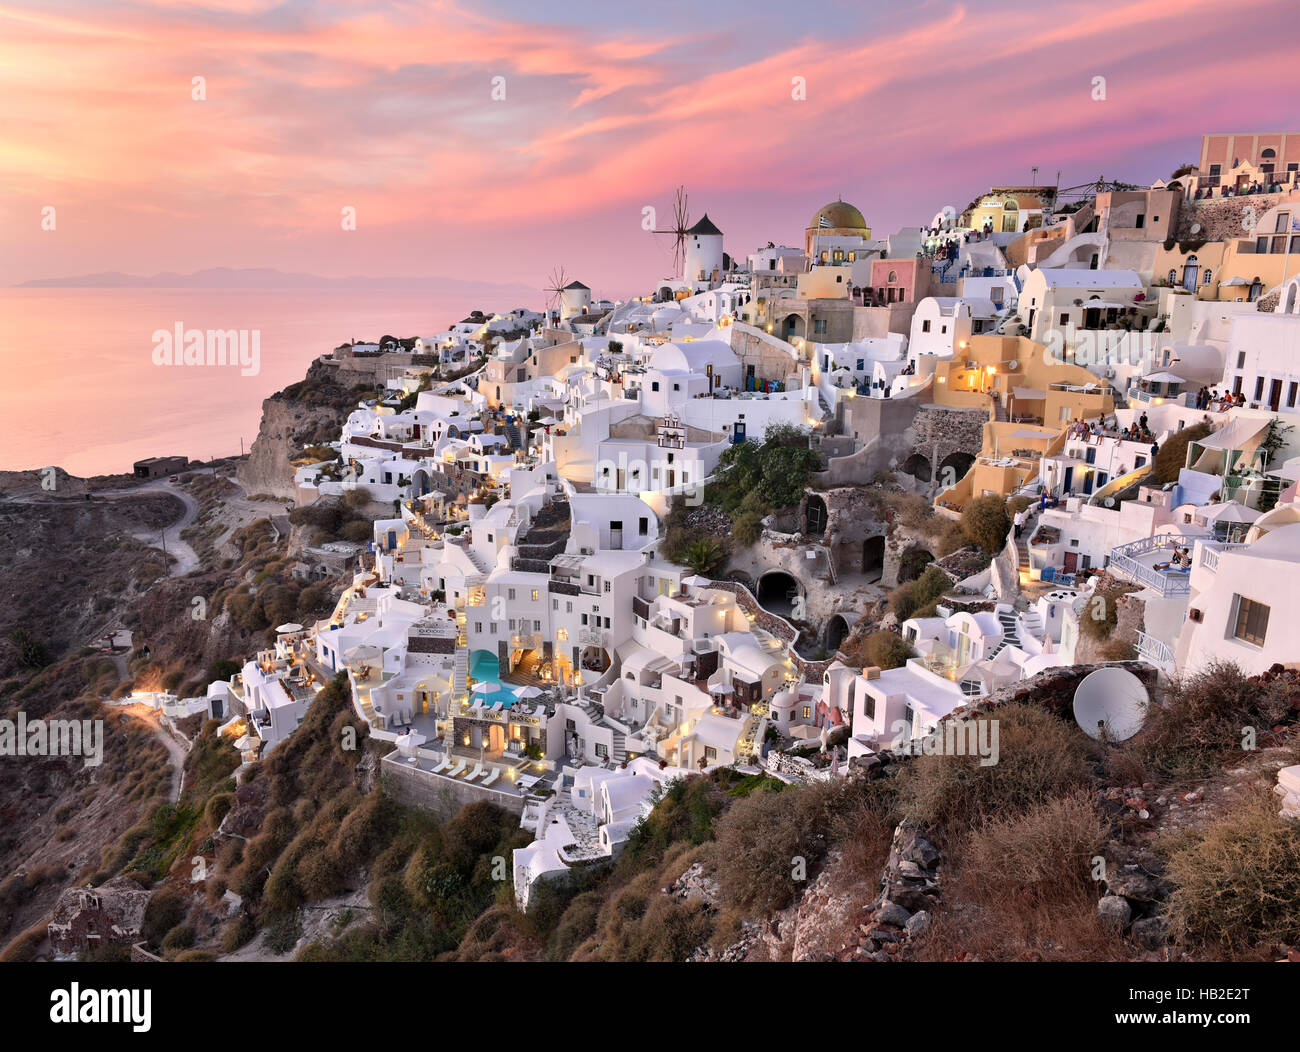 Oia Village in Cycladic Architecture style in Santorini, Greece during a pink sunset. Stock Photo